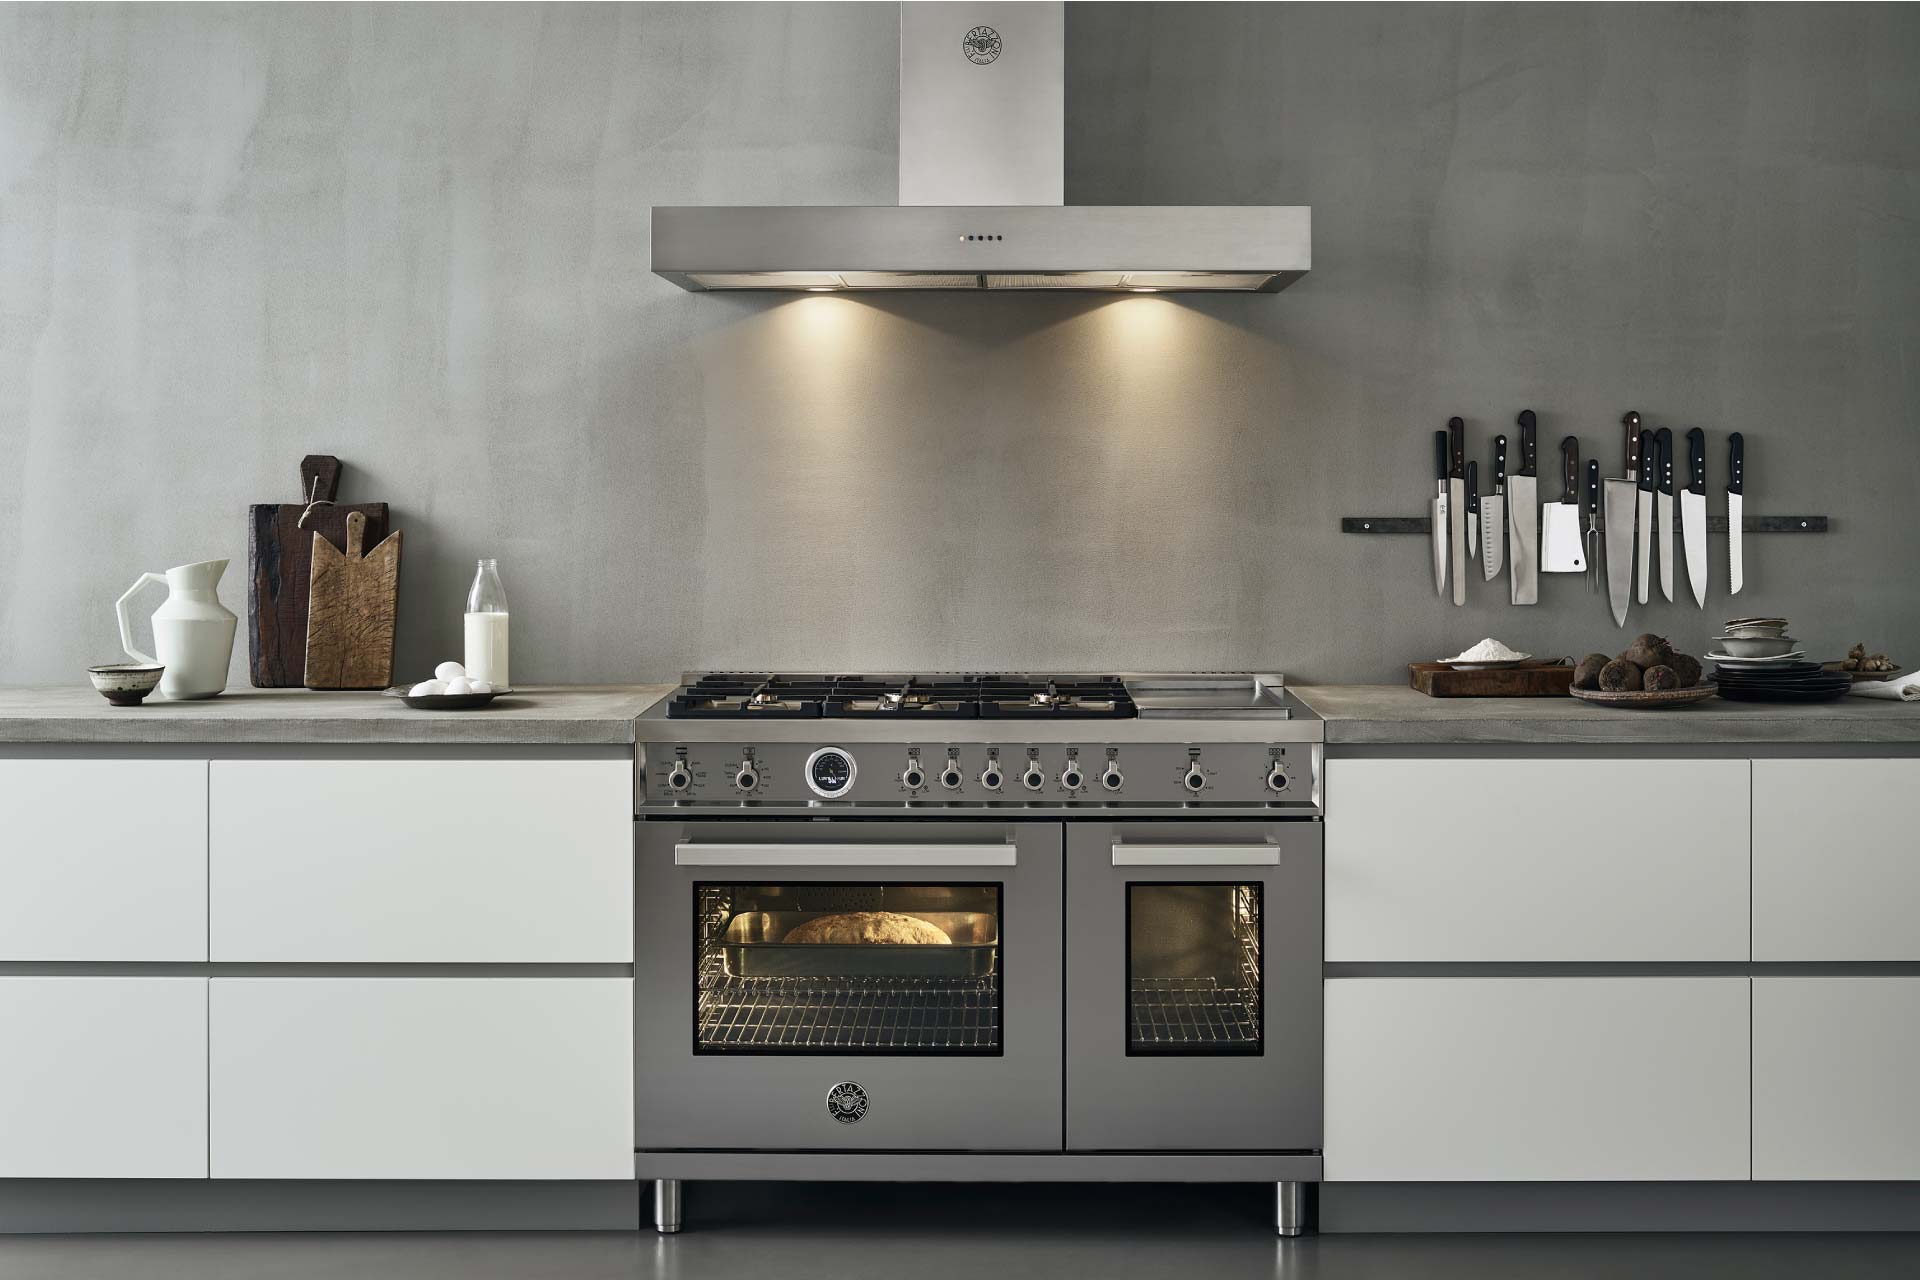 Introducing Our New Professional and Master Series Ranges - Bertazzoni